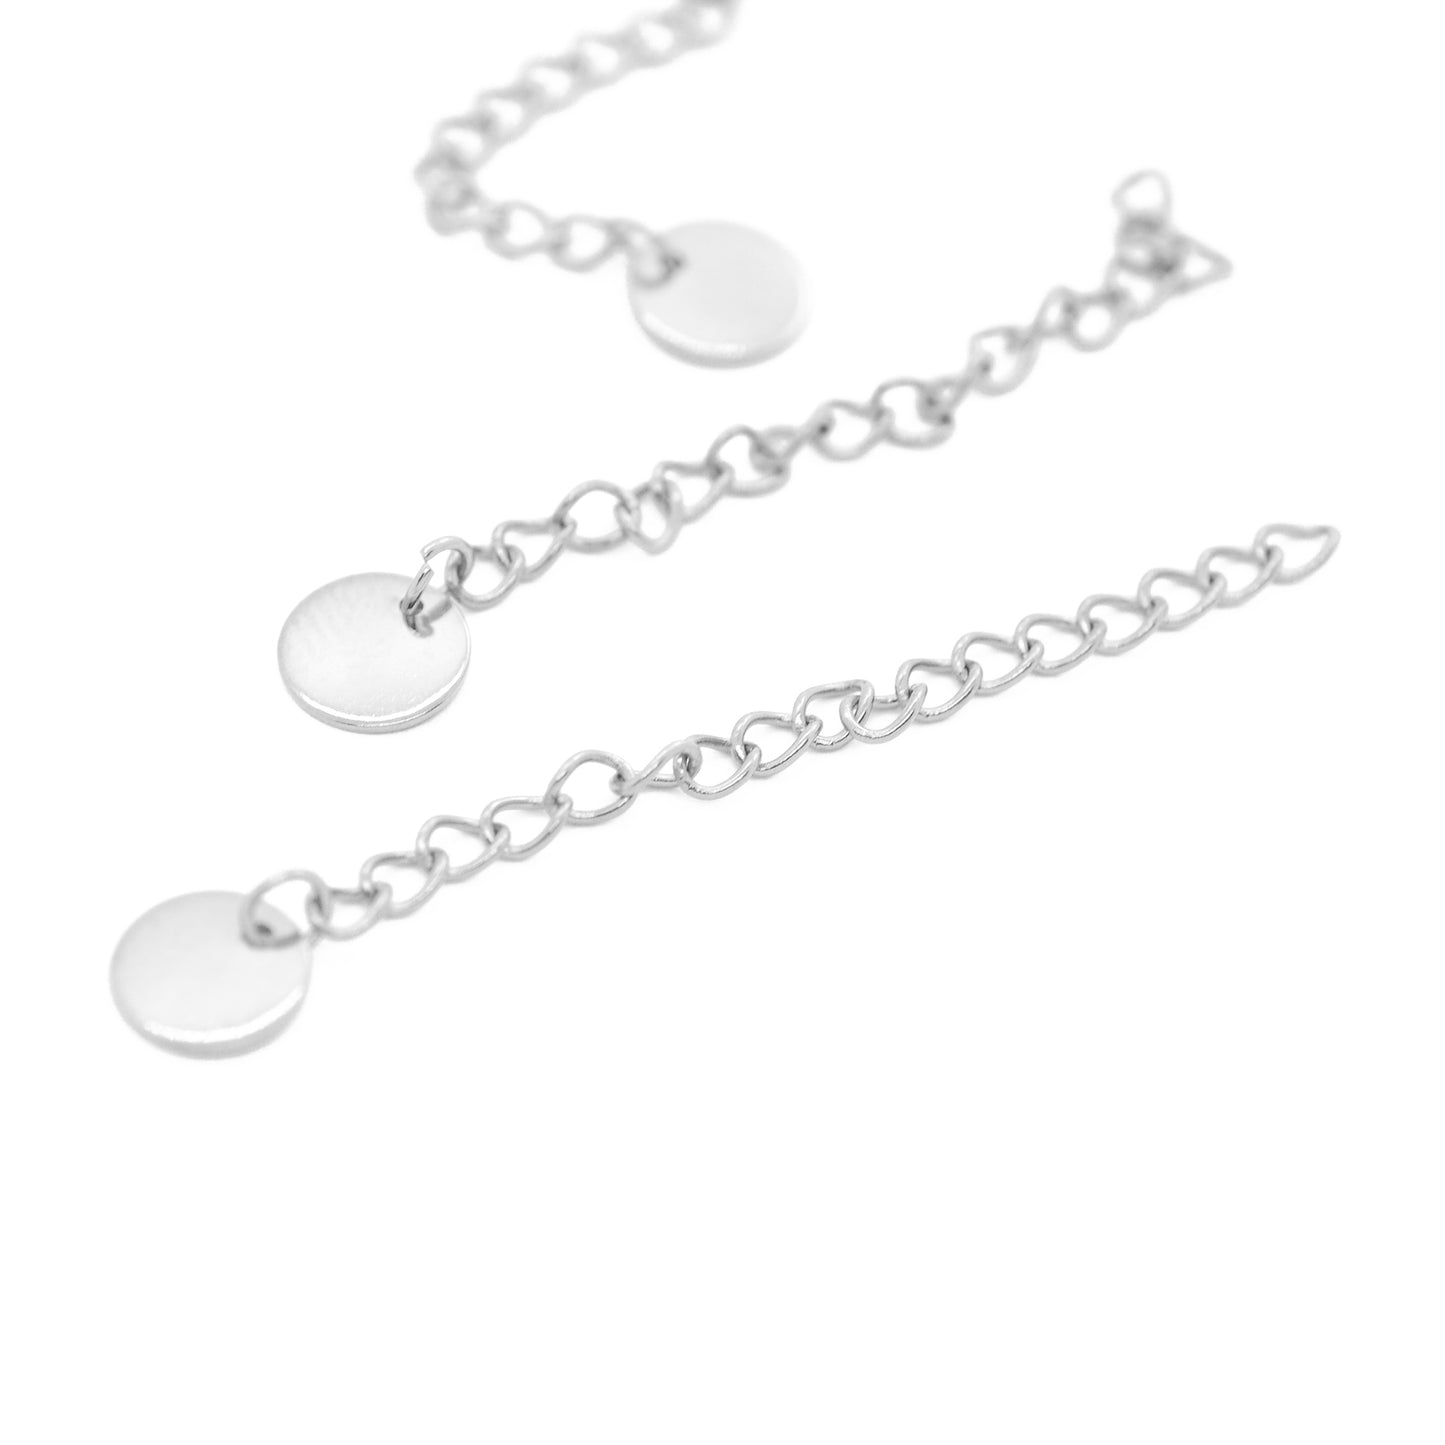 Stainless steel extension chain with pendant / silver colored / 55mm